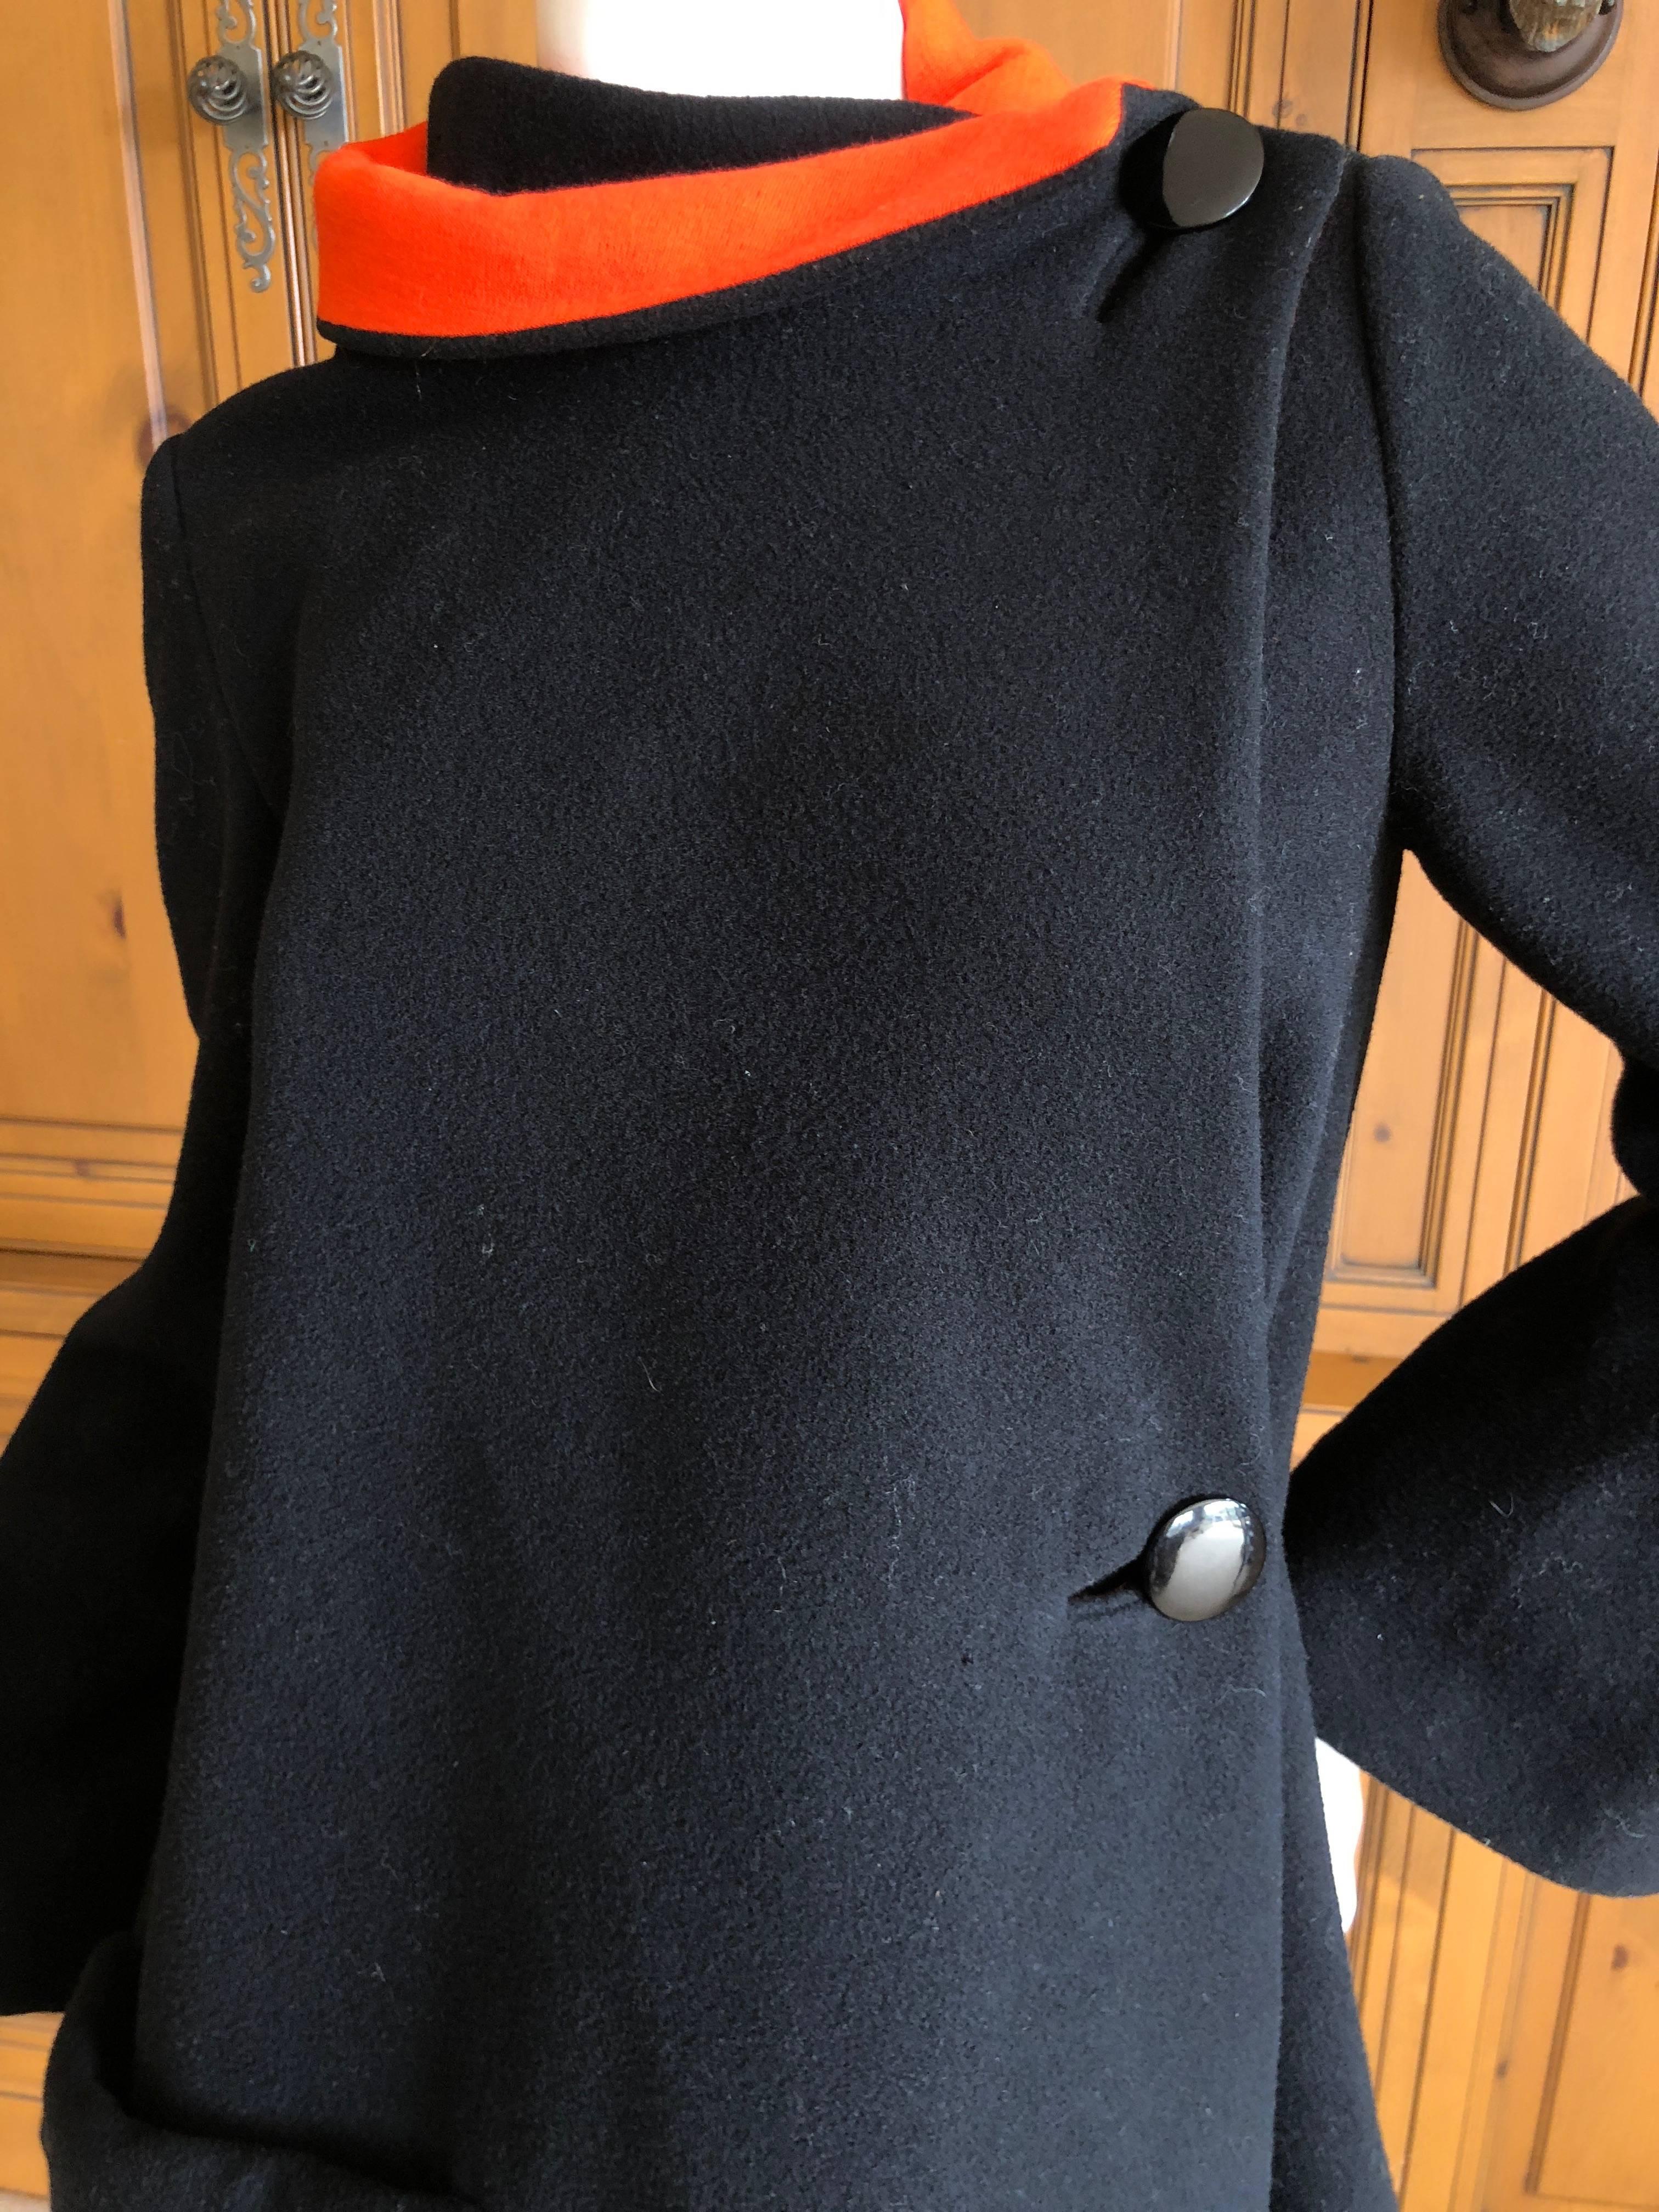 Cardinali 1970 Black Wool Coat with Orange Lining and Matching Skirt For Sale 3